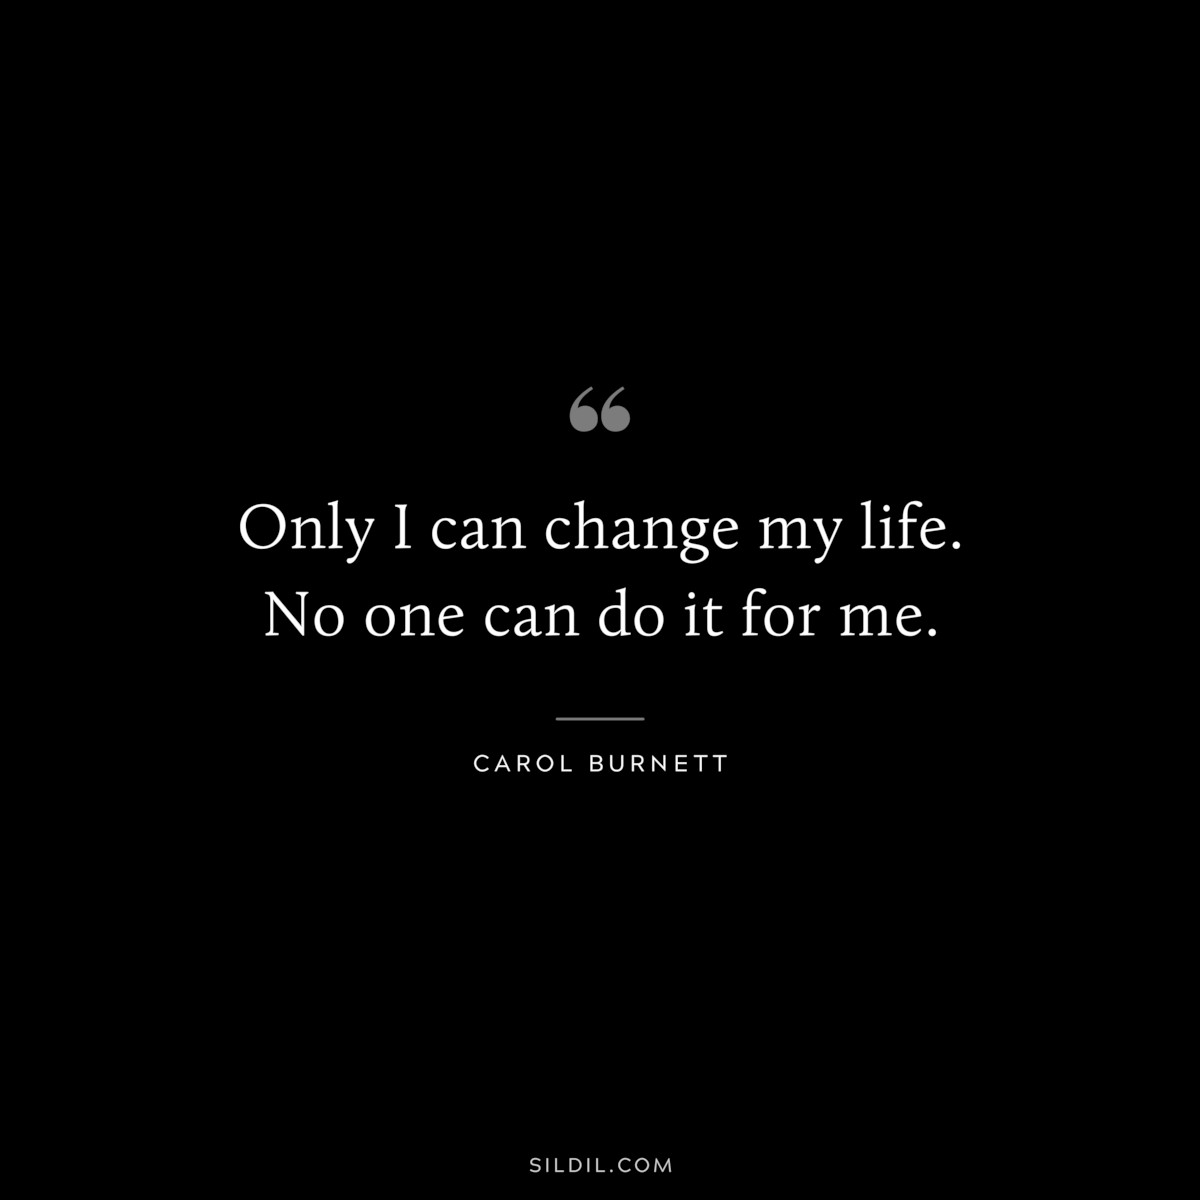 Only I can change my life. No one can do it for me. ― Carol Burnett